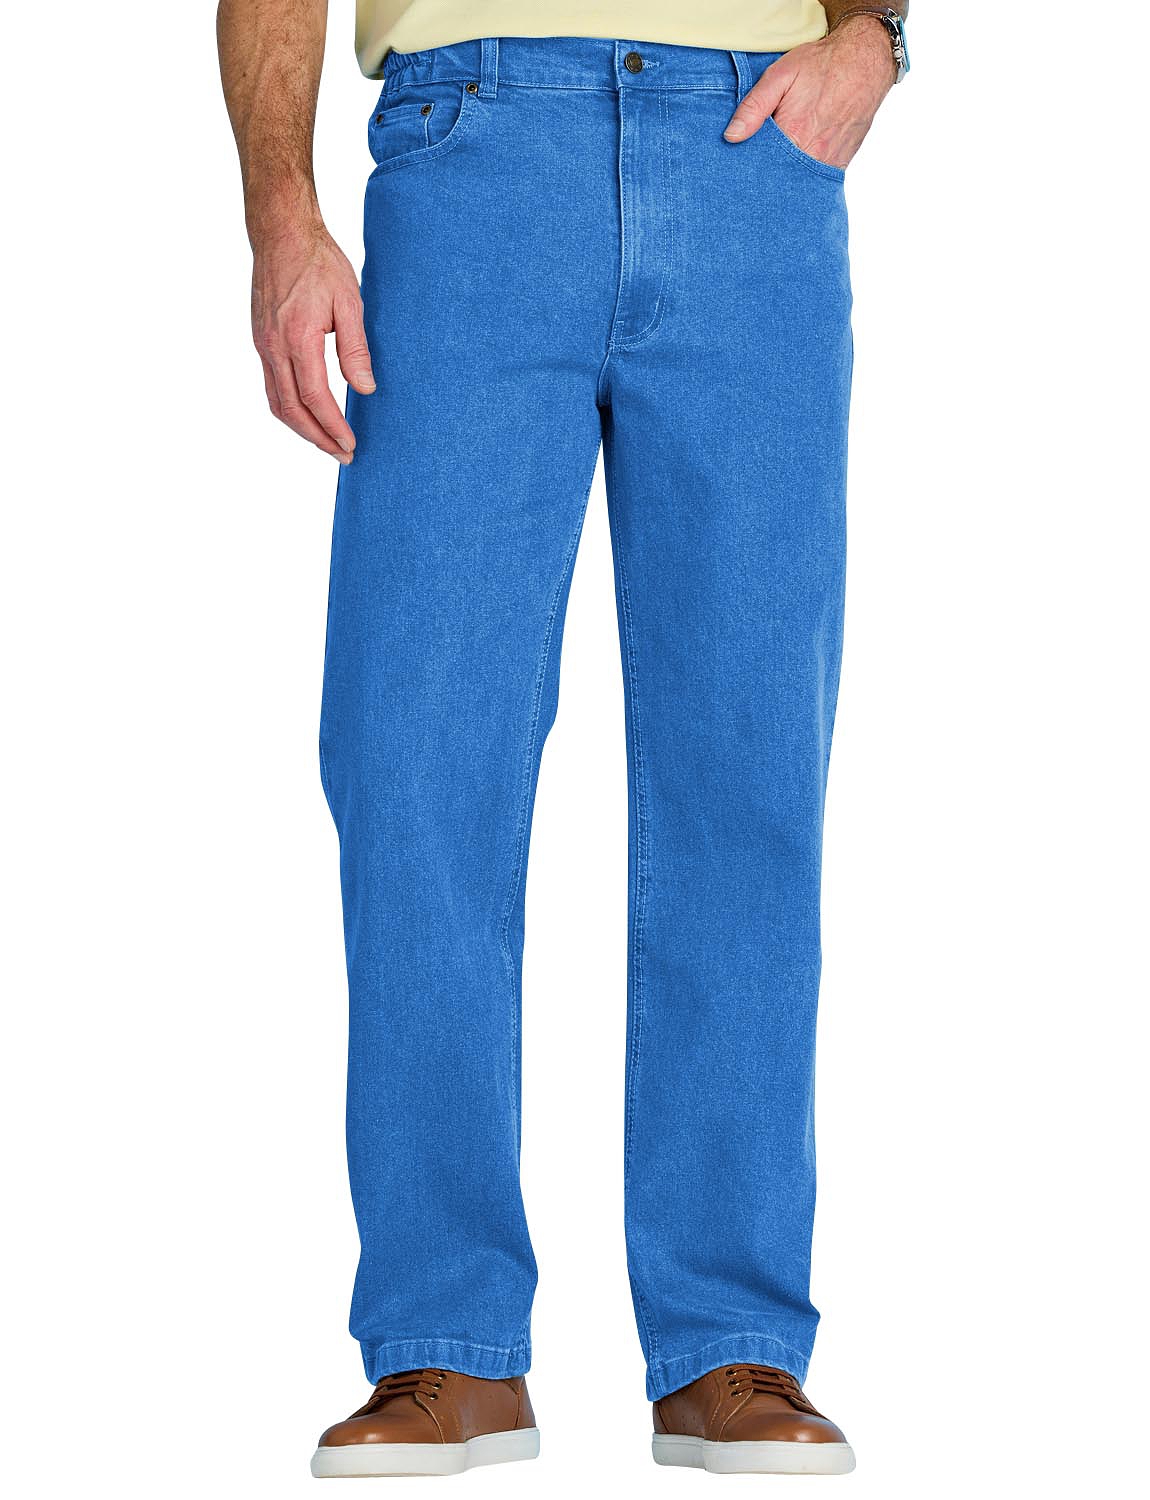 Buy > mens stretch waist jeans > in stock